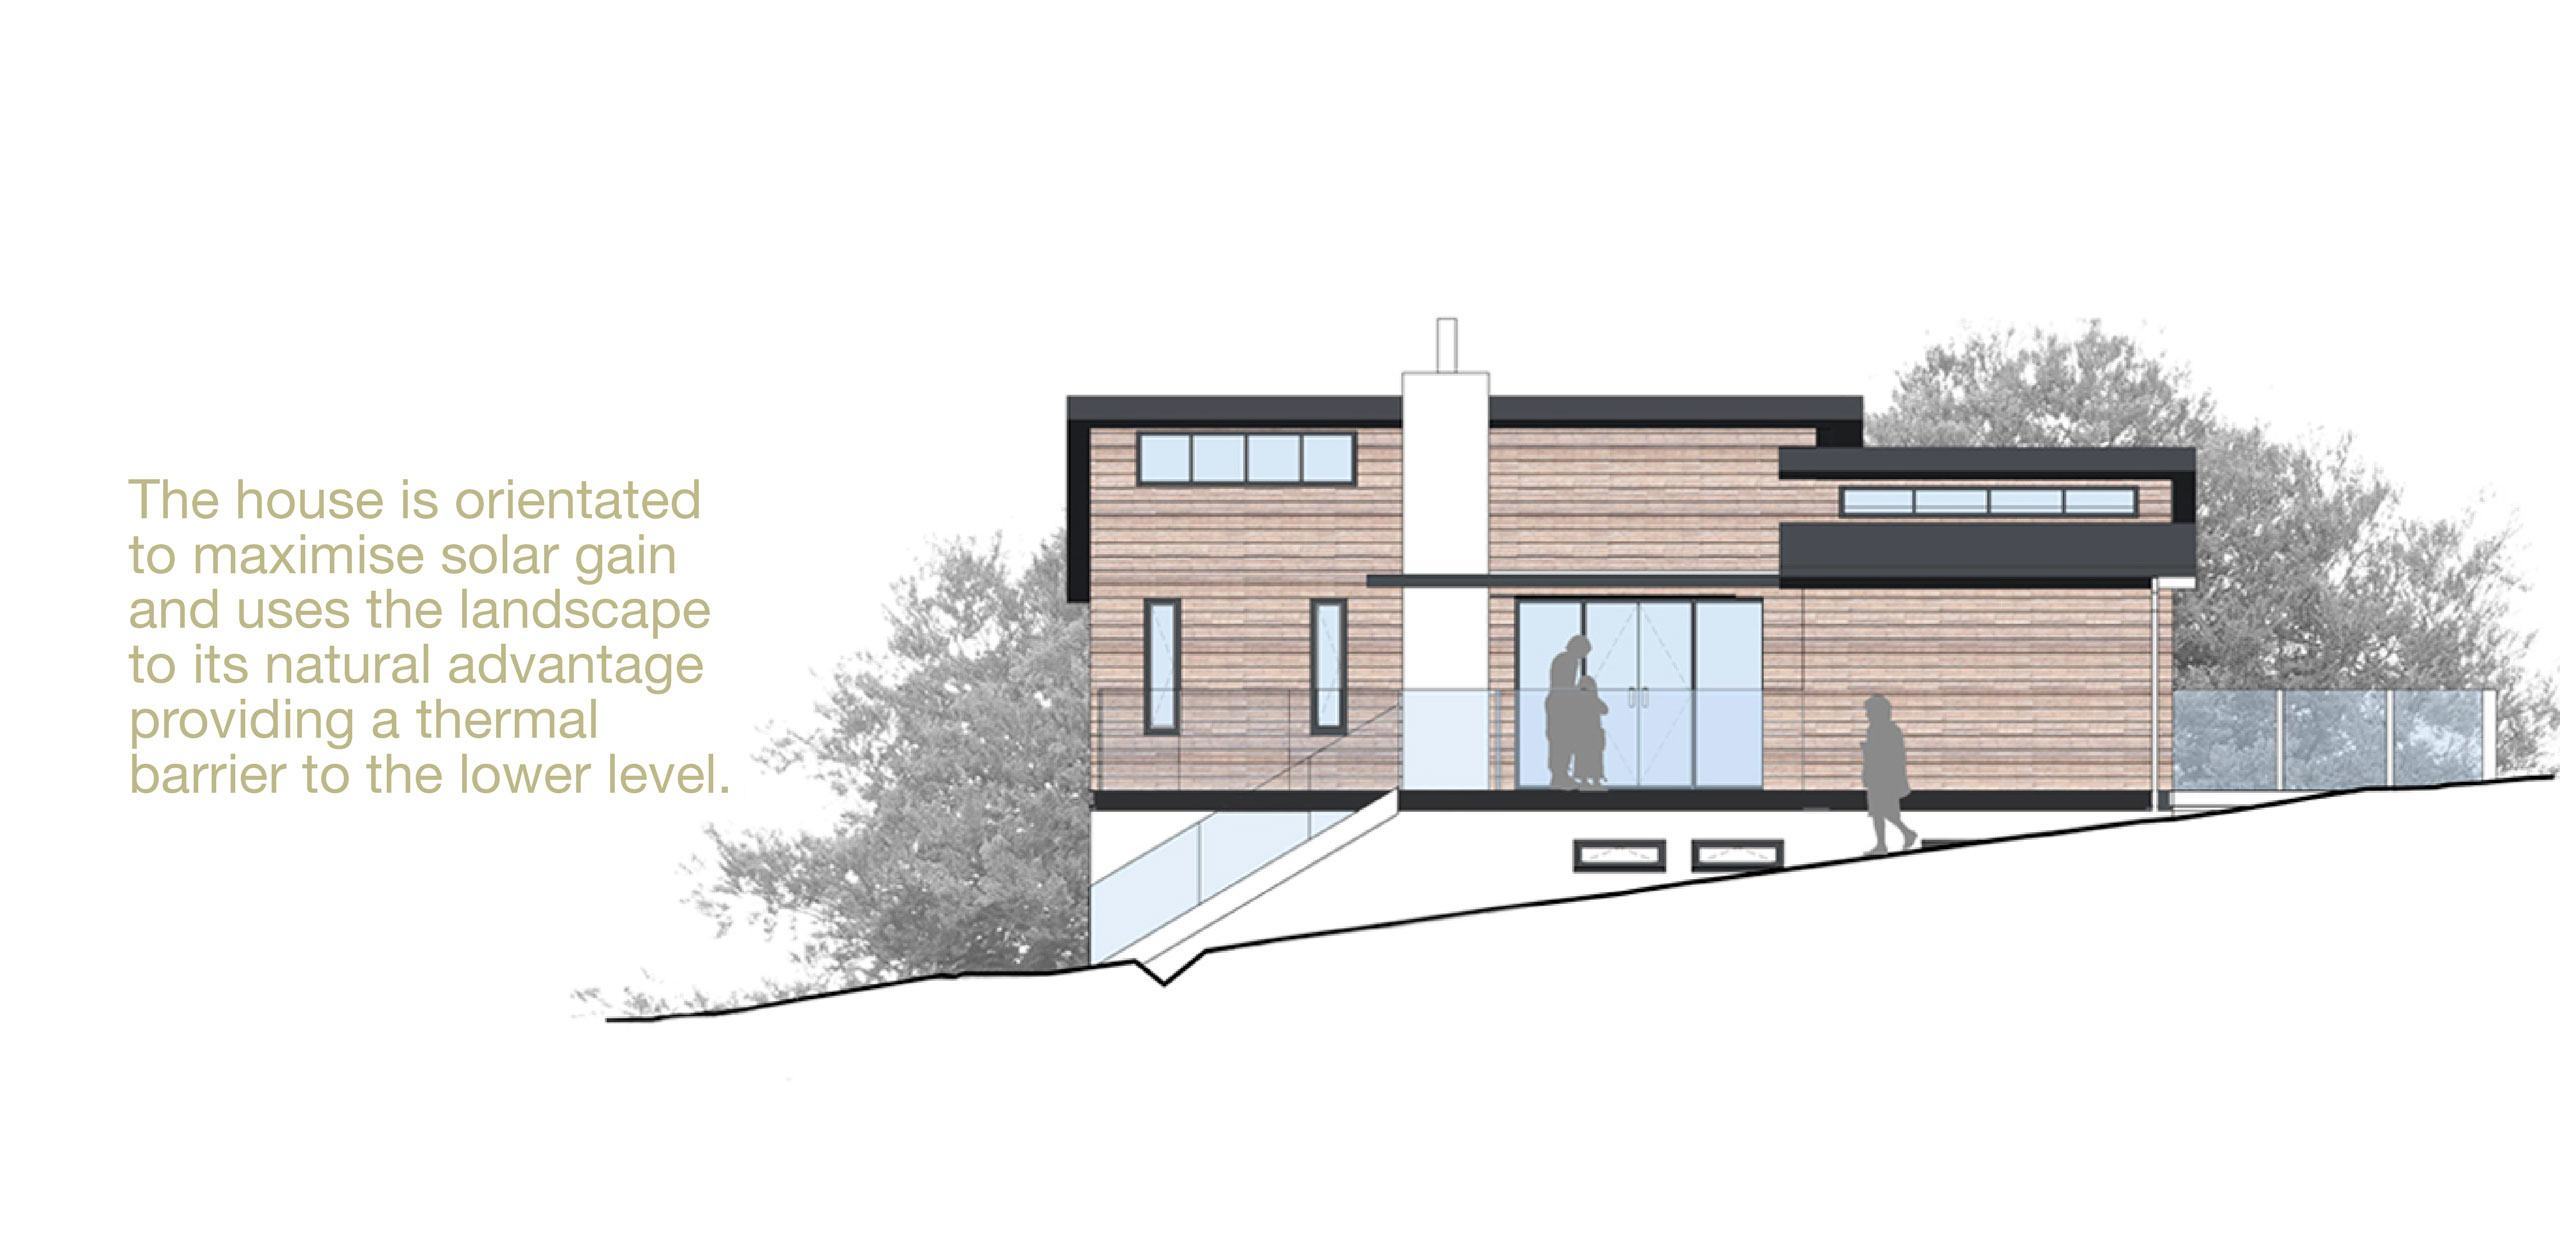 London Road - The house is orientated to maximise solar gain